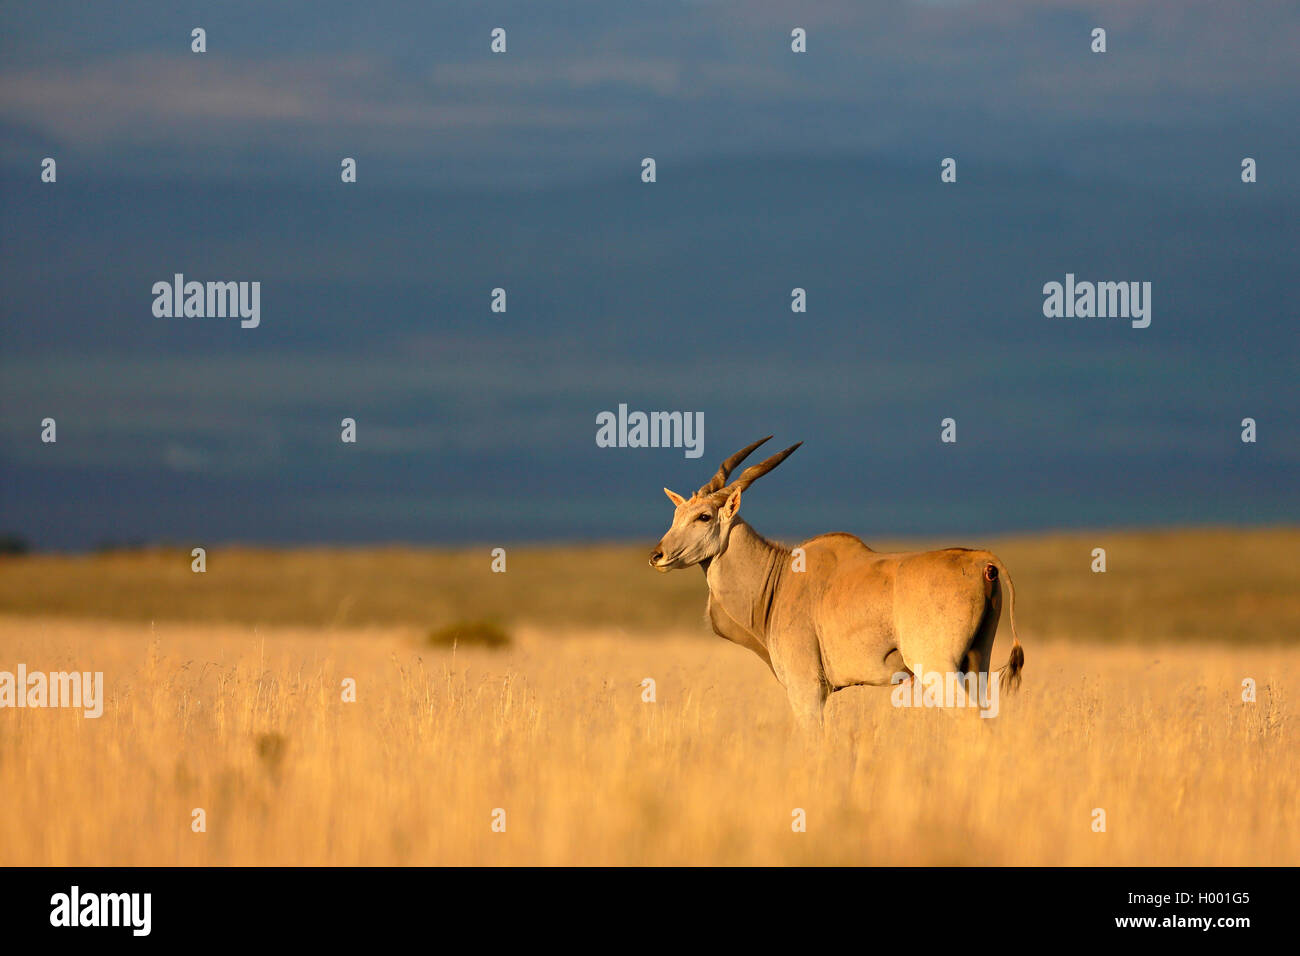 Common eland, Southern Eland (Taurotragus oryx, Tragelaphus oryx), stands in African Savanna, South Africa, Eastern Cape, Mountain Zebra National Park Stock Photo